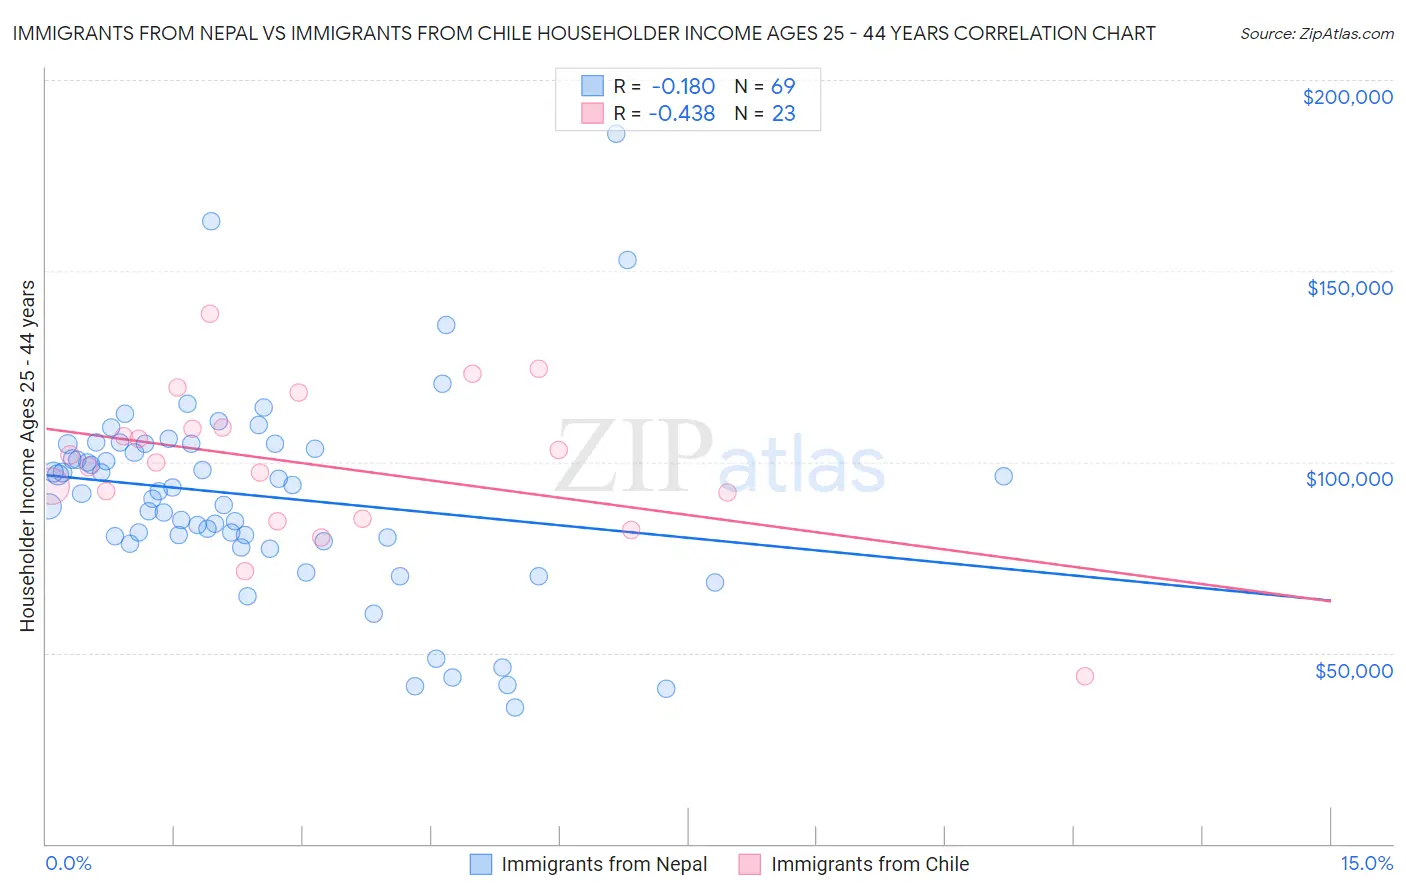 Immigrants from Nepal vs Immigrants from Chile Householder Income Ages 25 - 44 years